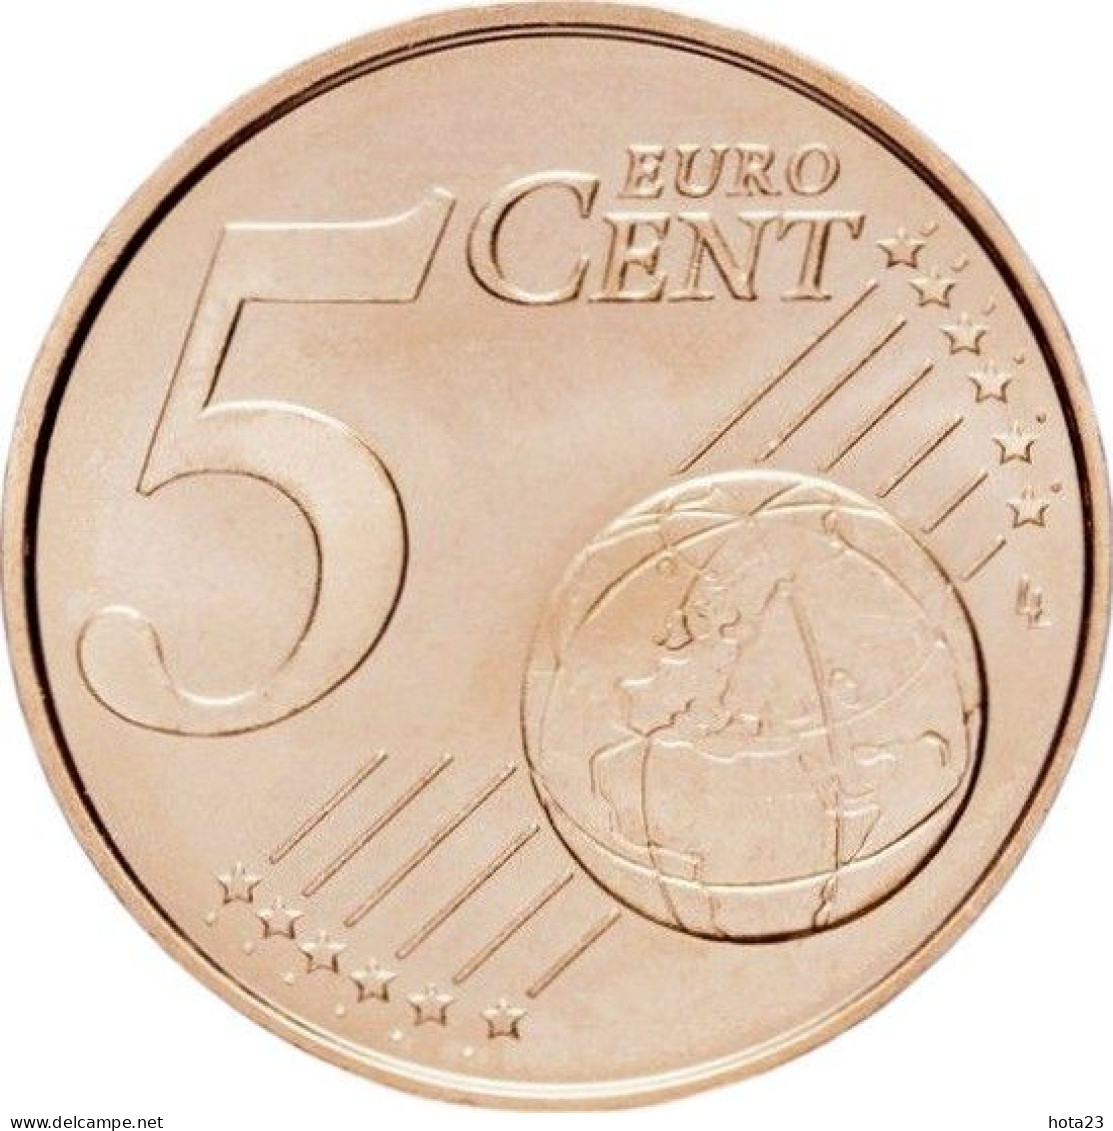 Latvia , Lettland, Lettonia  2019 5 Euro Cent Coin  UNC From Roll - Latvia